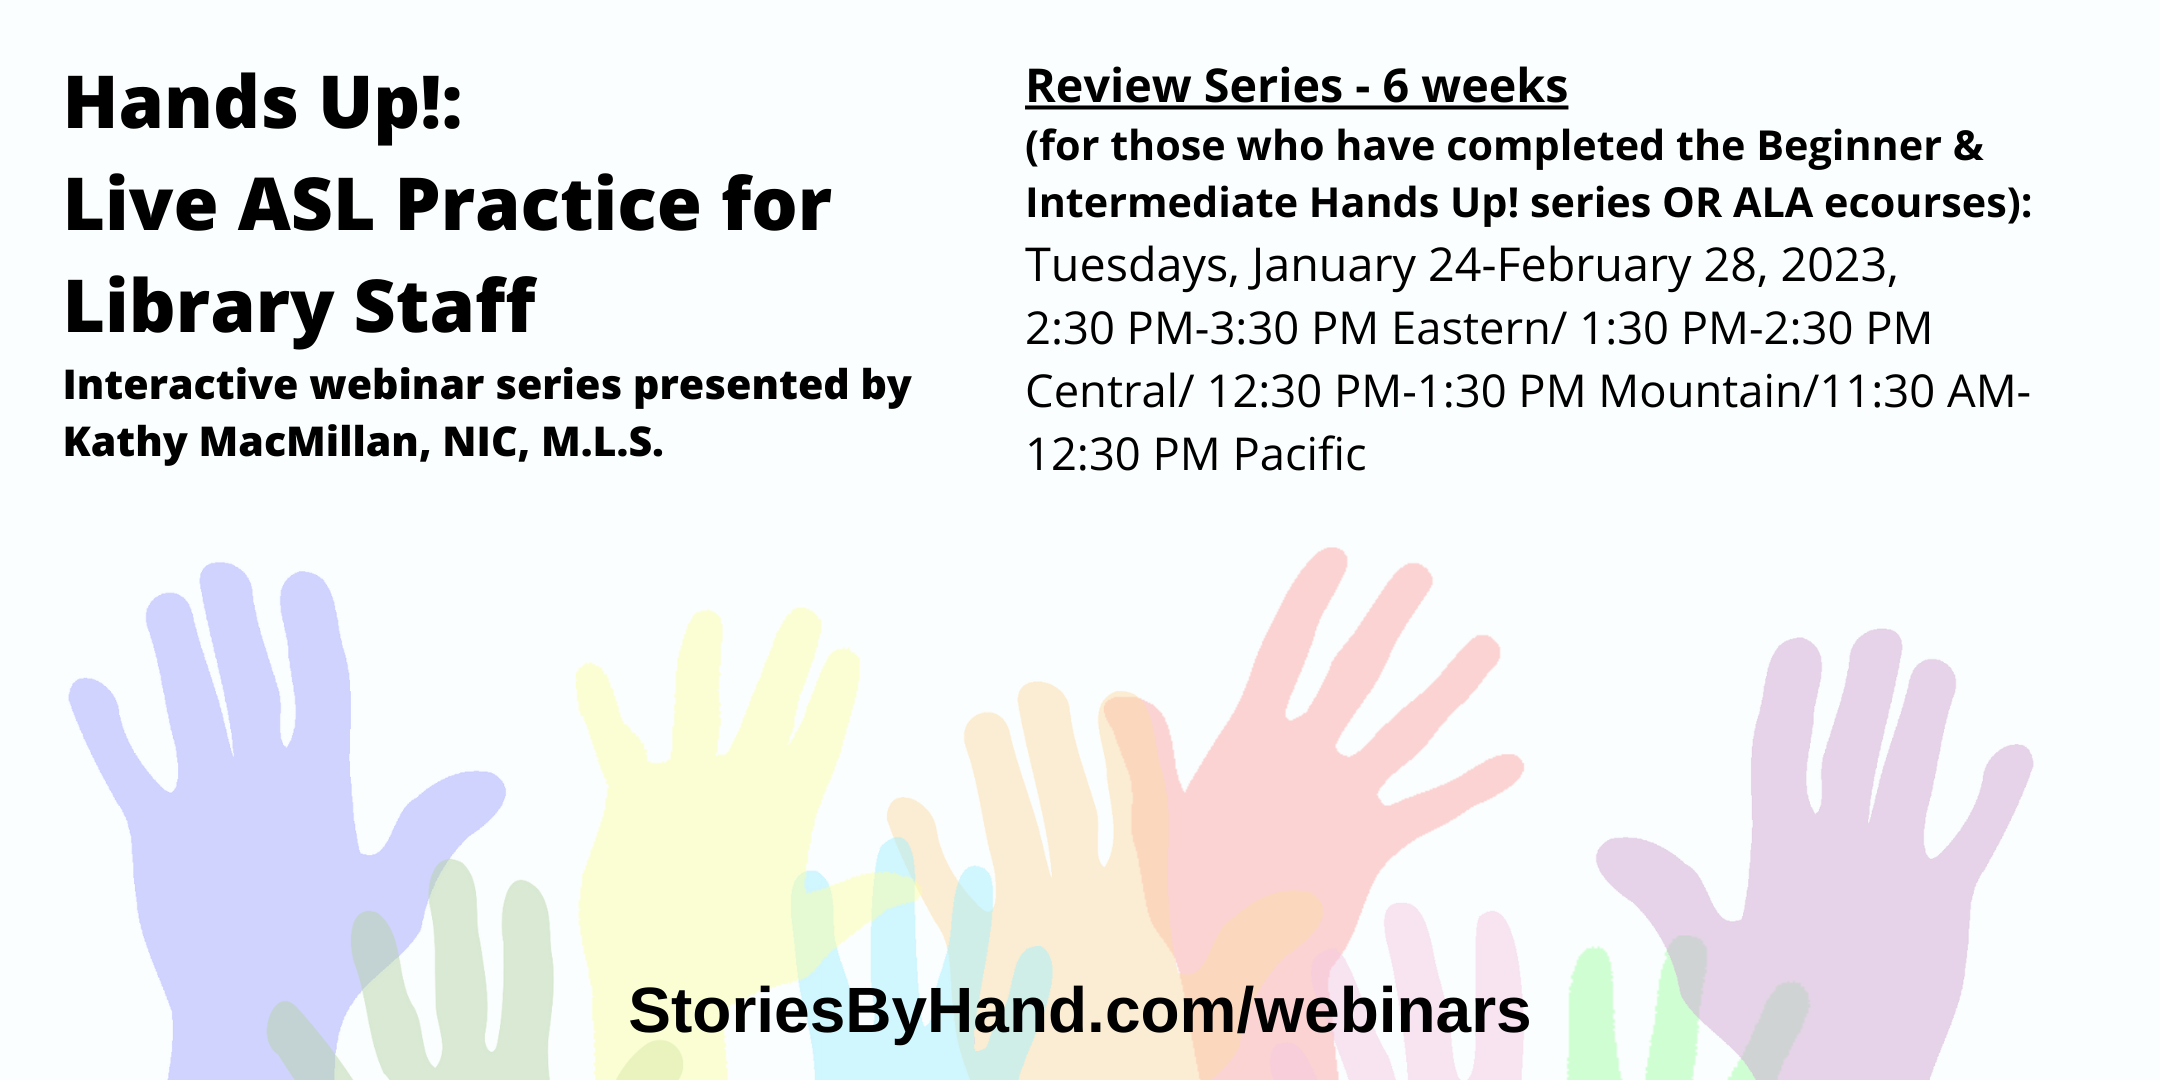 Hands Up!: Live ASL Practice for Library Staff | Interactive webinar series presented by 
Kathy MacMillan, NIC, M.L.S. | Review Series - 6 weeks
(for those who have completed the Beginner & Intermediate Hands Up! series OR ALA ecourses): Tuesdays, January 24-February 28, 2023, 2:30 PM-3:30 PM Eastern/ 1:30 PM-2:30 PM Central/ 12:30 PM-1:30 PM Mountain/11:30 AM-12:30 PM Pacific | StoriesByHand.com/webinars | Words appear over a drawing of upraised hands in bright pastel colors against a white background.